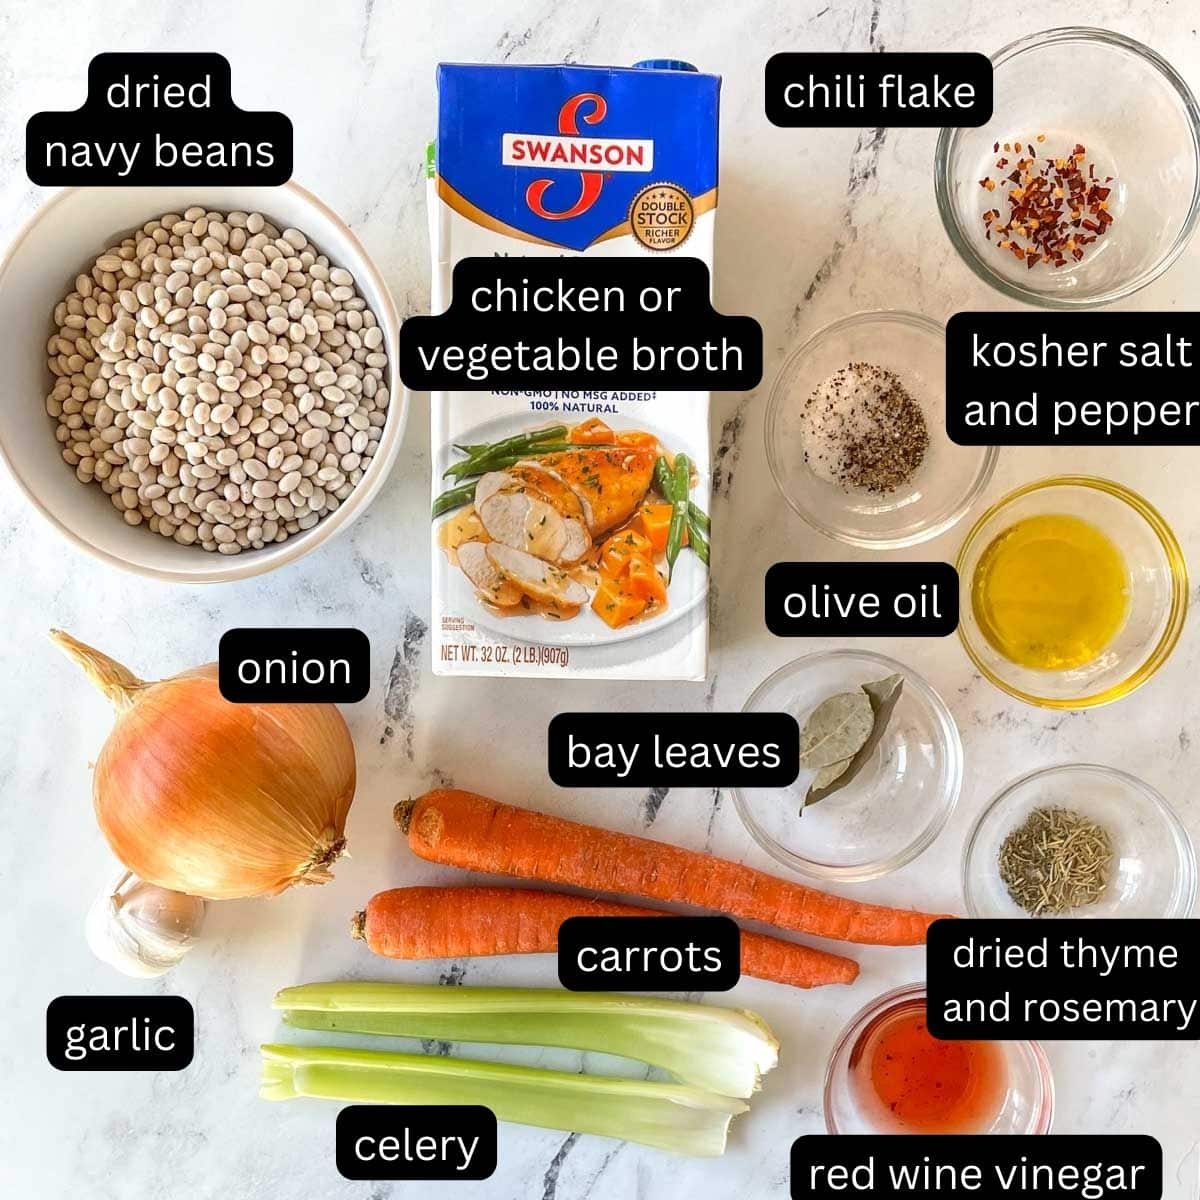 The labeled ingredients for Instant Pot Navy Bean Soup are shown on a white marble counter.